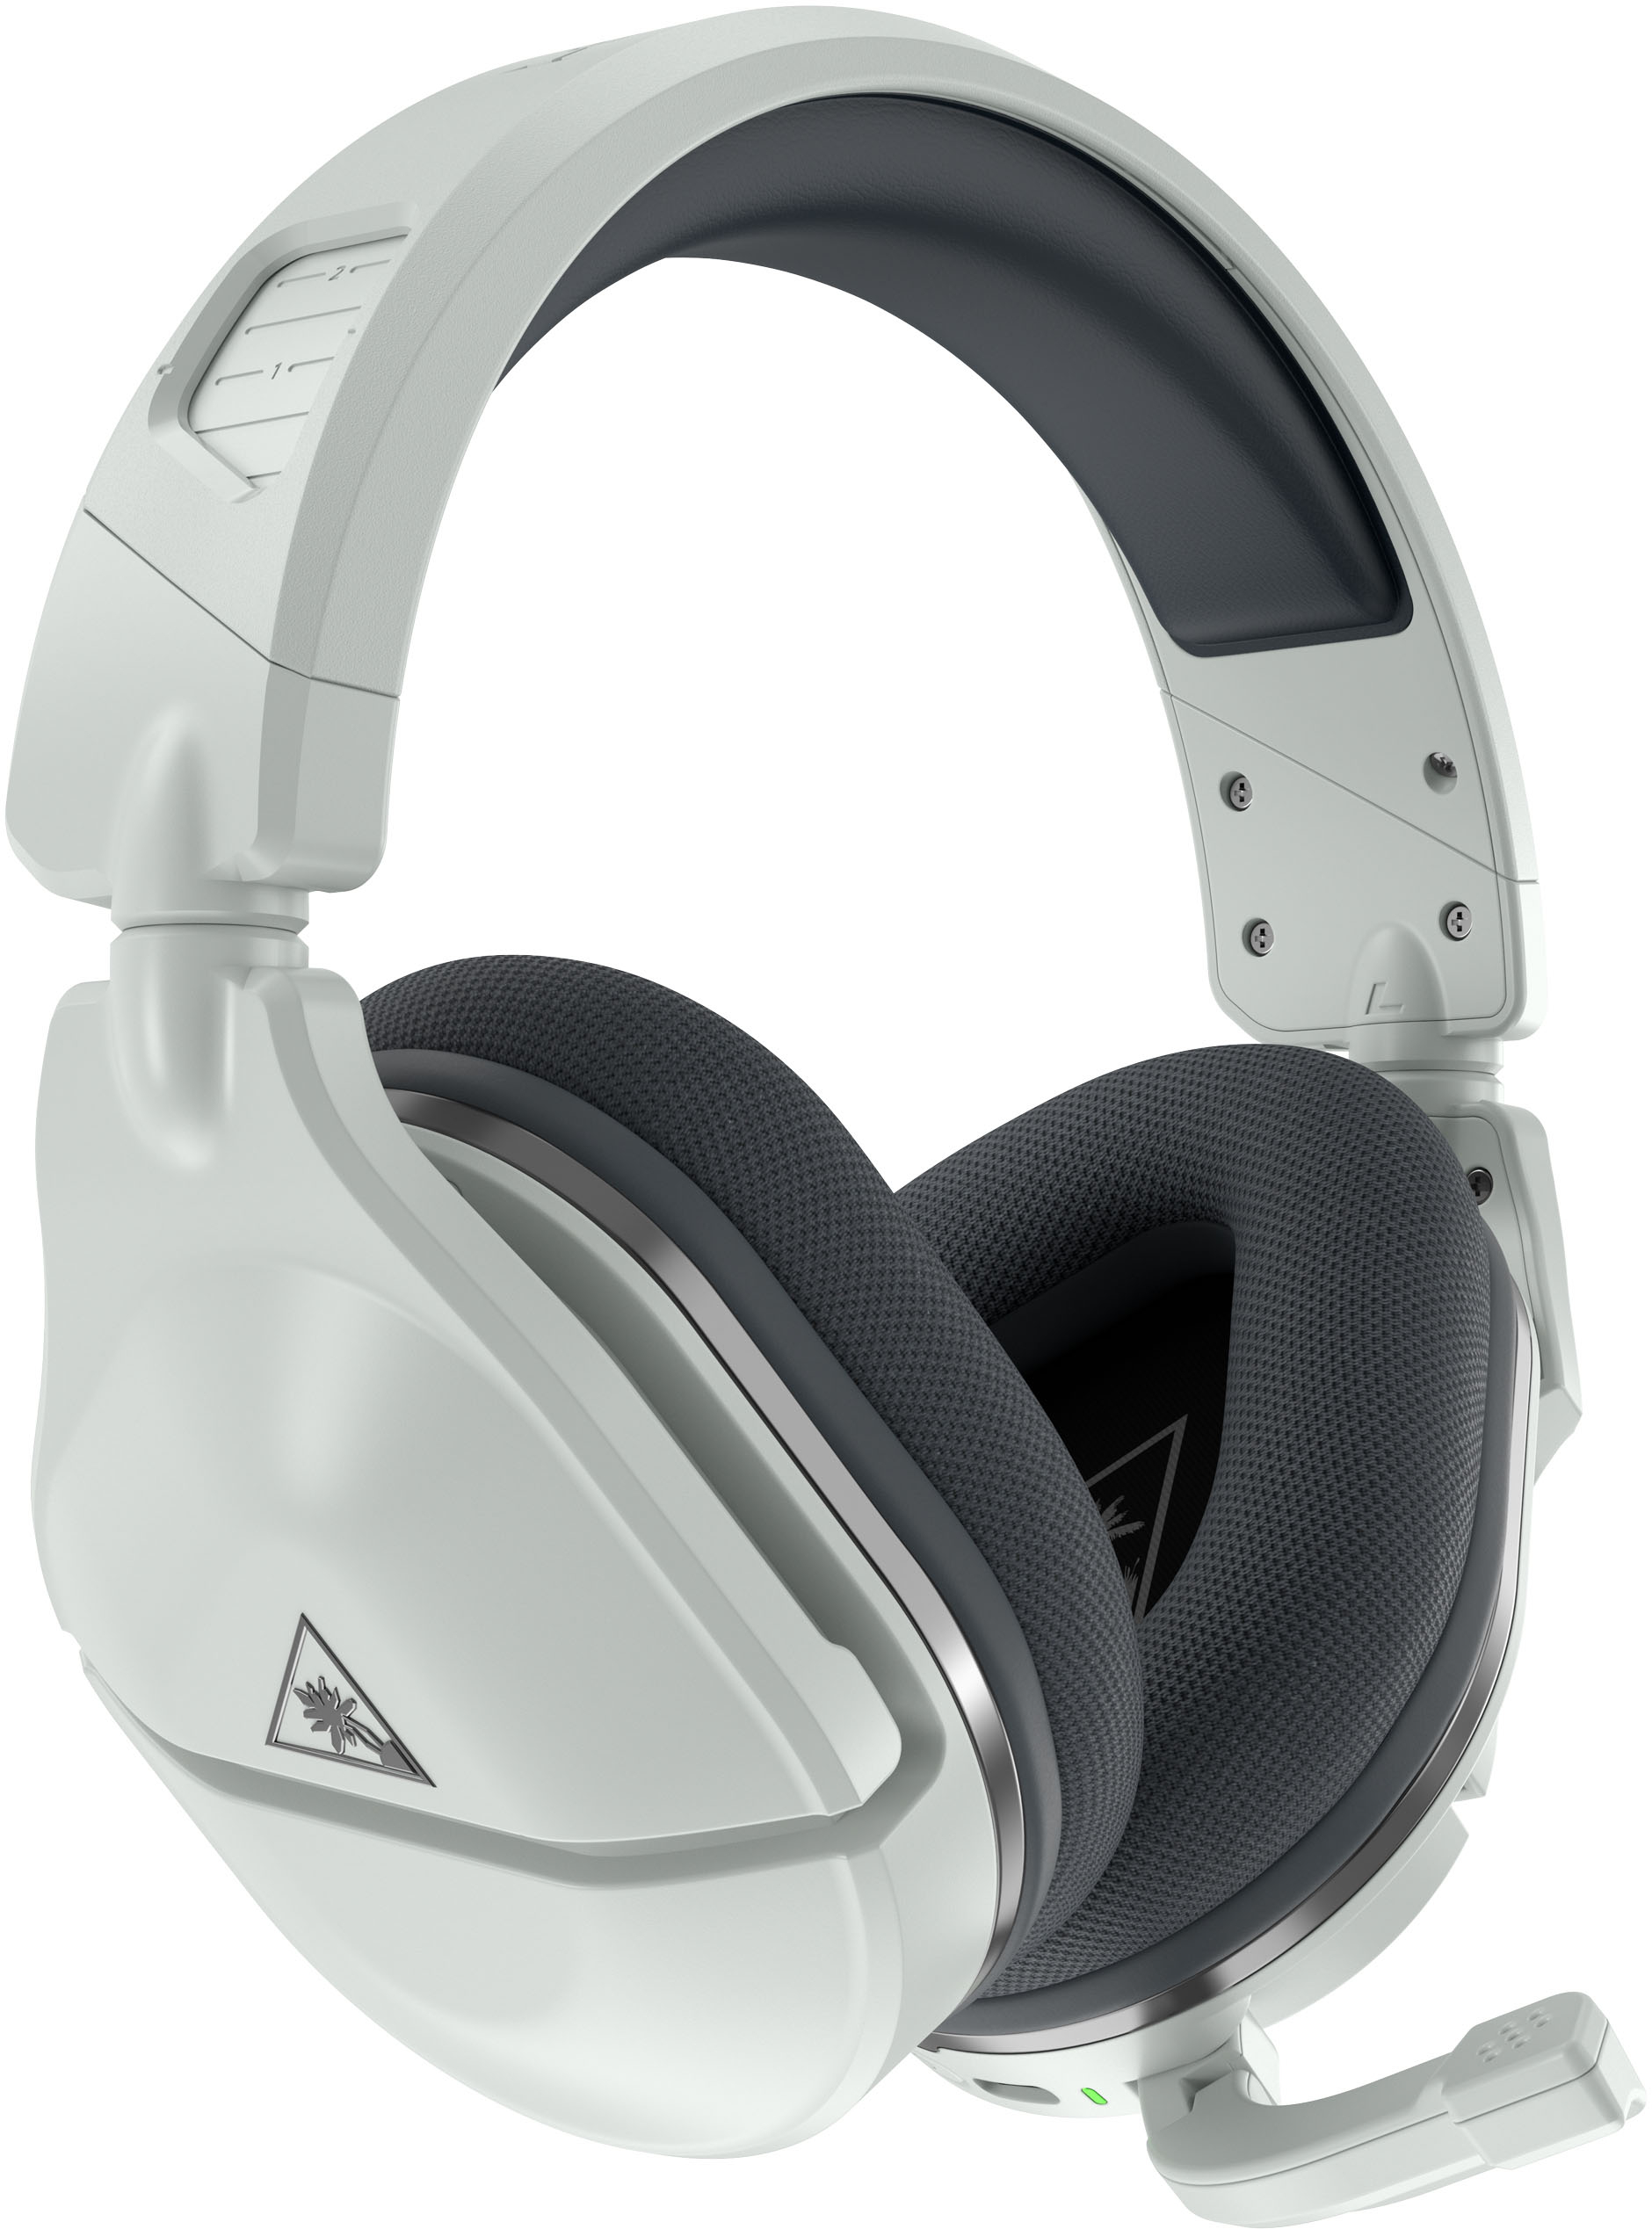 Turtle Beach Stealth Cutting Out Seeds Yonsei Ac Kr